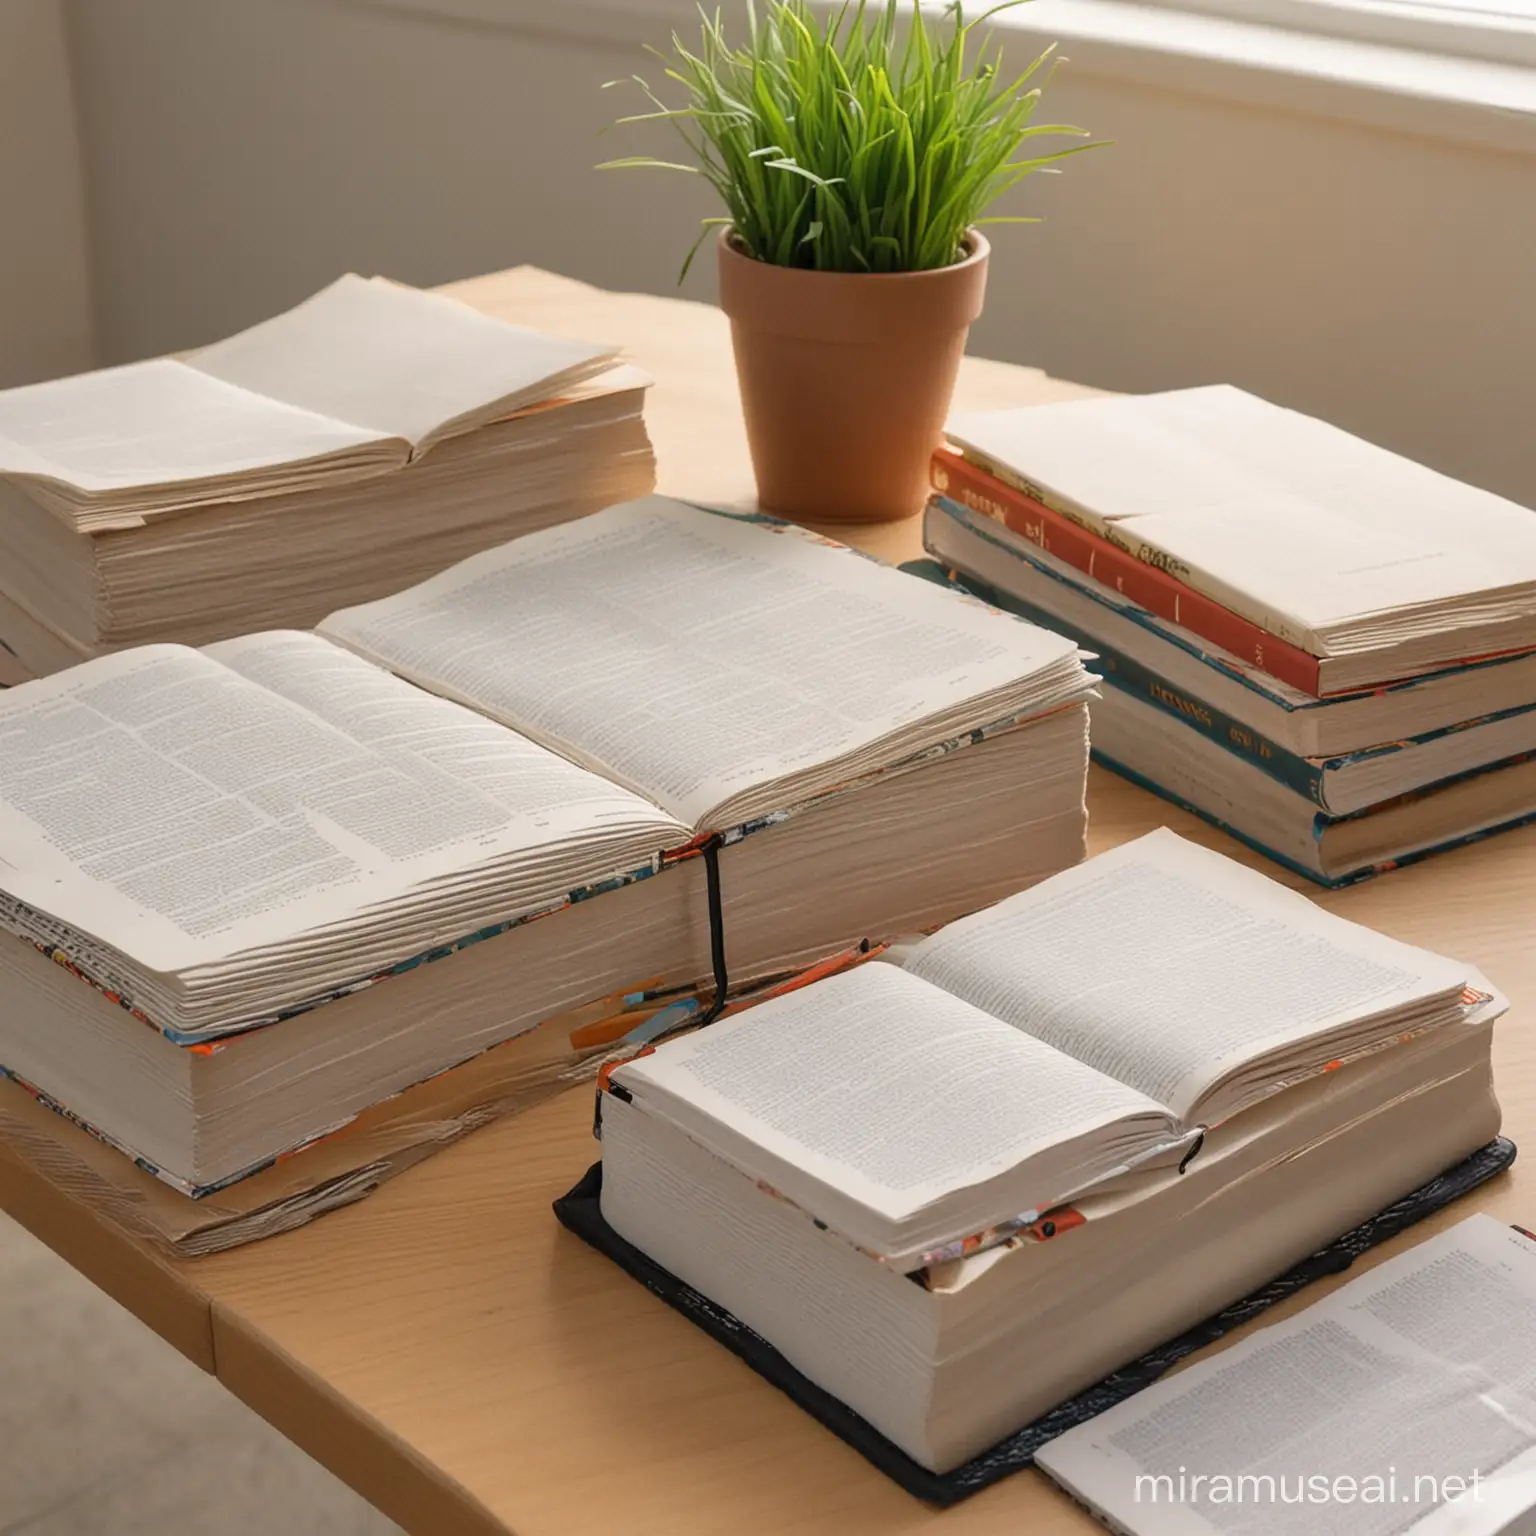 a table with numerous modern, hardcover, full-color English language textbooks, dictionaries, and notebook loose-leaf sheets; books are not neatly placed; someone has used them for studying;